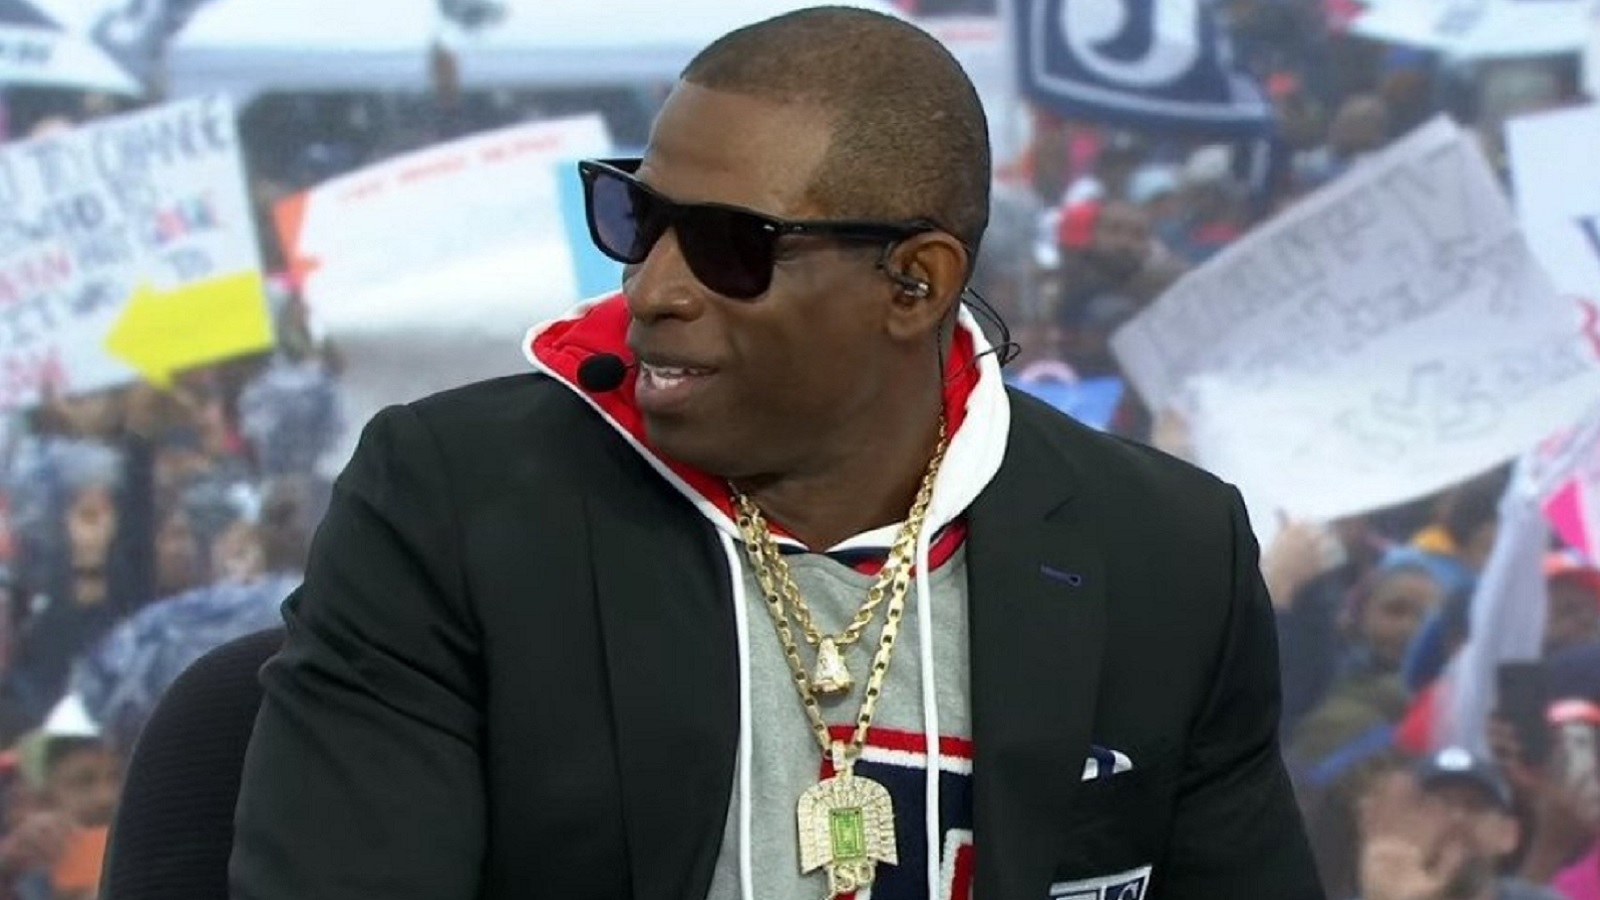 Deion Sanders makes early social media pitch to transfer players